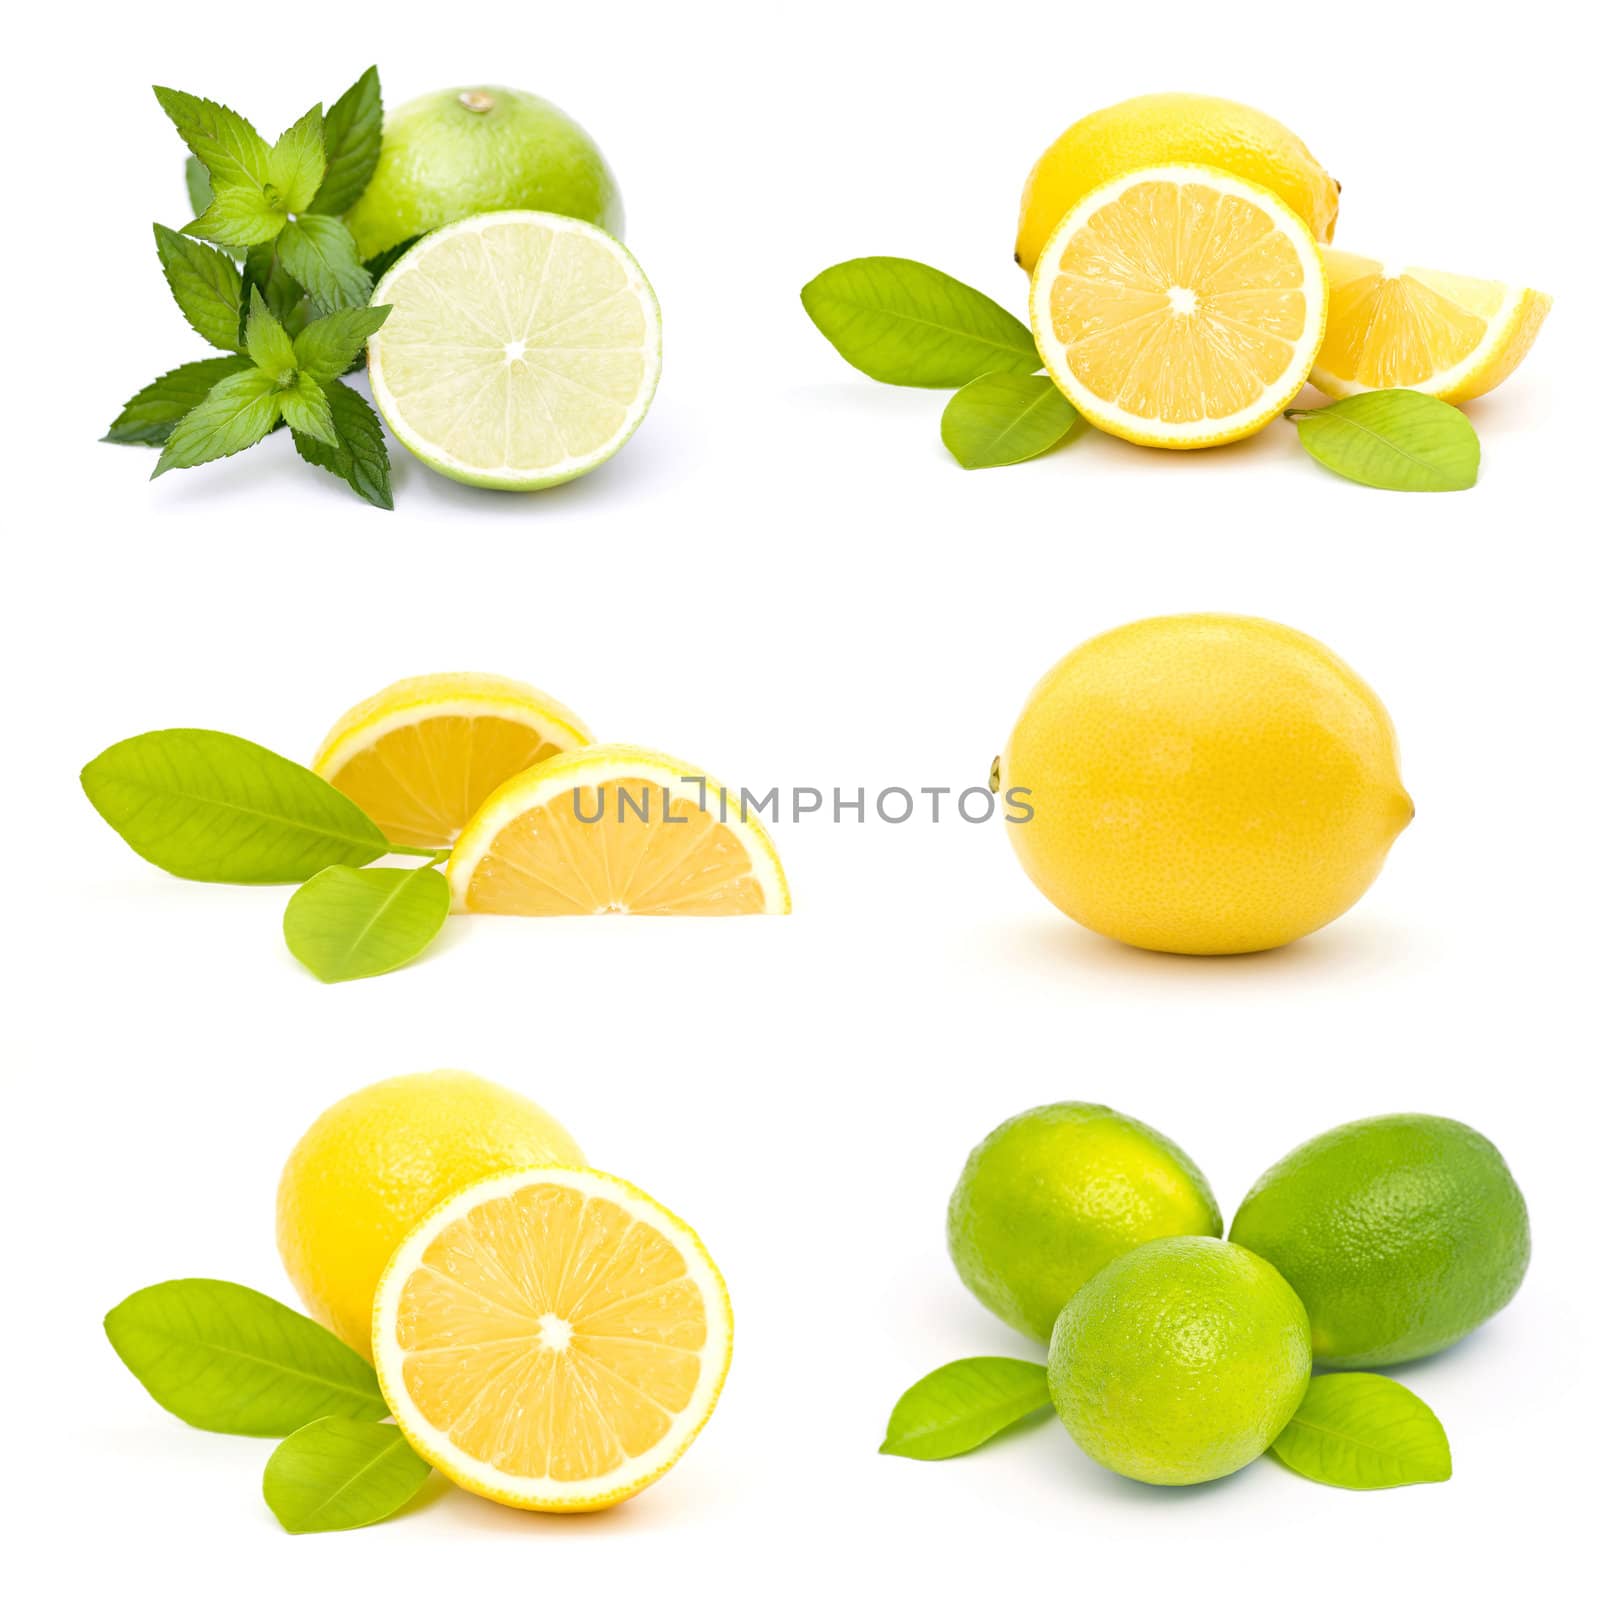 collection of fresh limes and lemons - collage by miradrozdowski